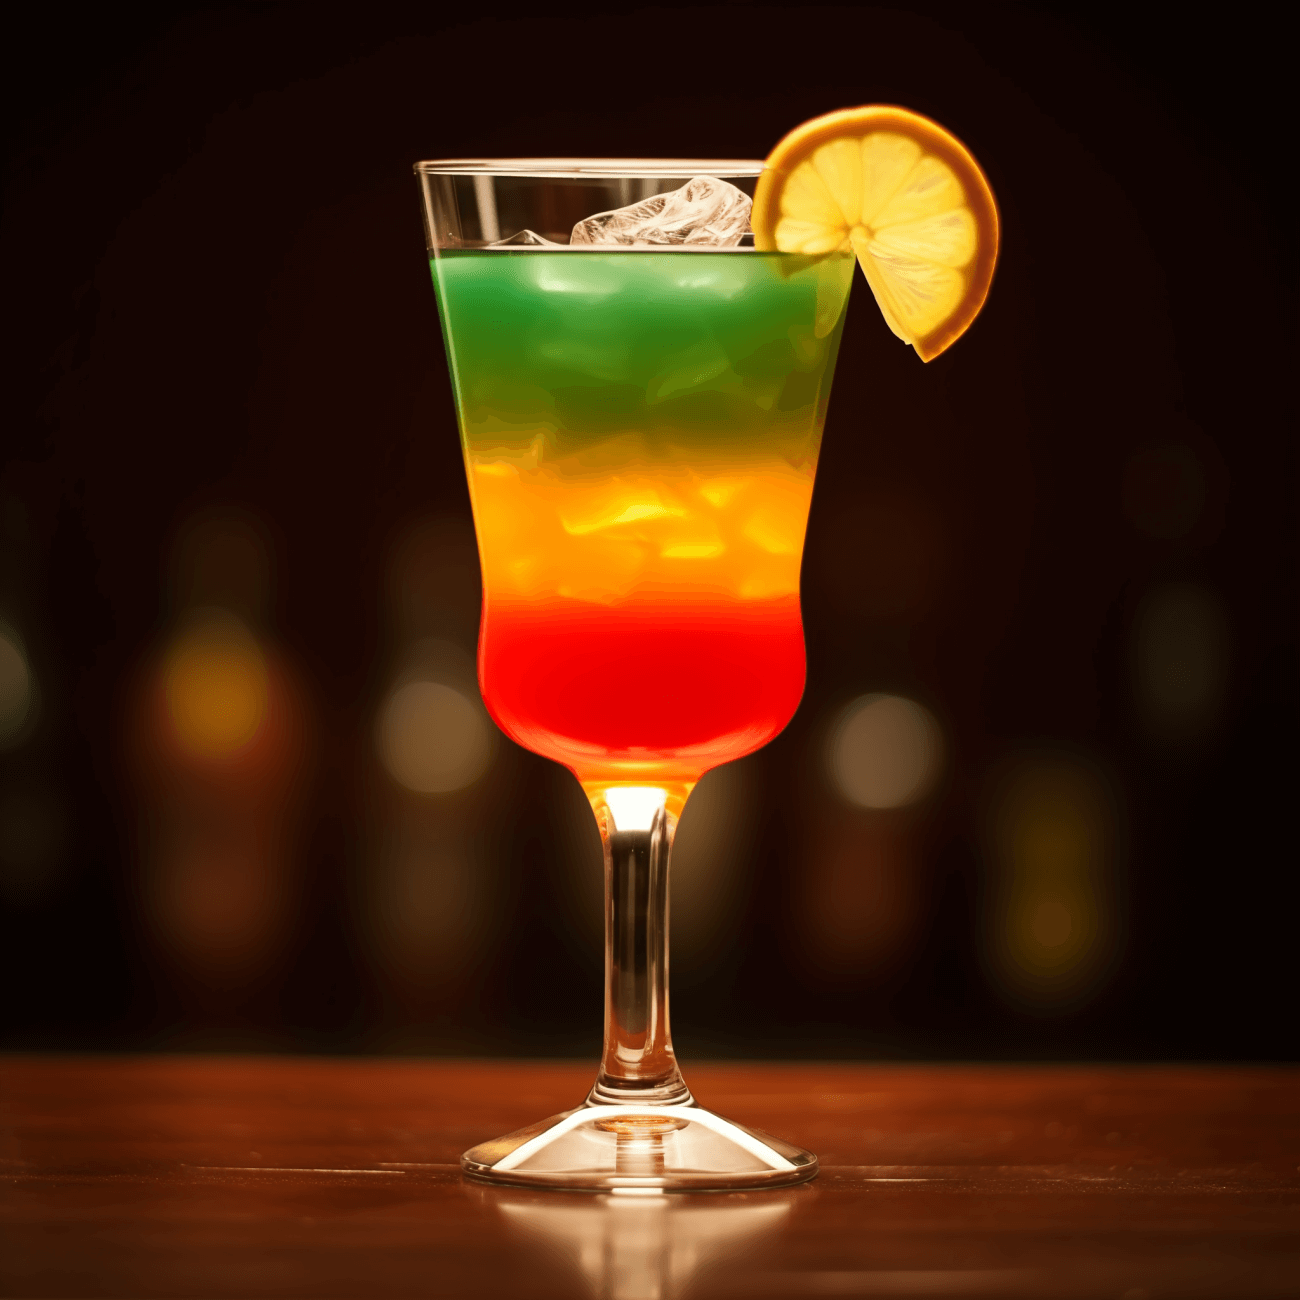 The Machu Picchu cocktail is a delightful balance of sweet and sour, with a hint of minty freshness. The Pisco provides a strong, fruity base, while the grenadine adds a sweet touch. The orange juice brings a tangy twist, and the mint leaves a refreshing aftertaste.